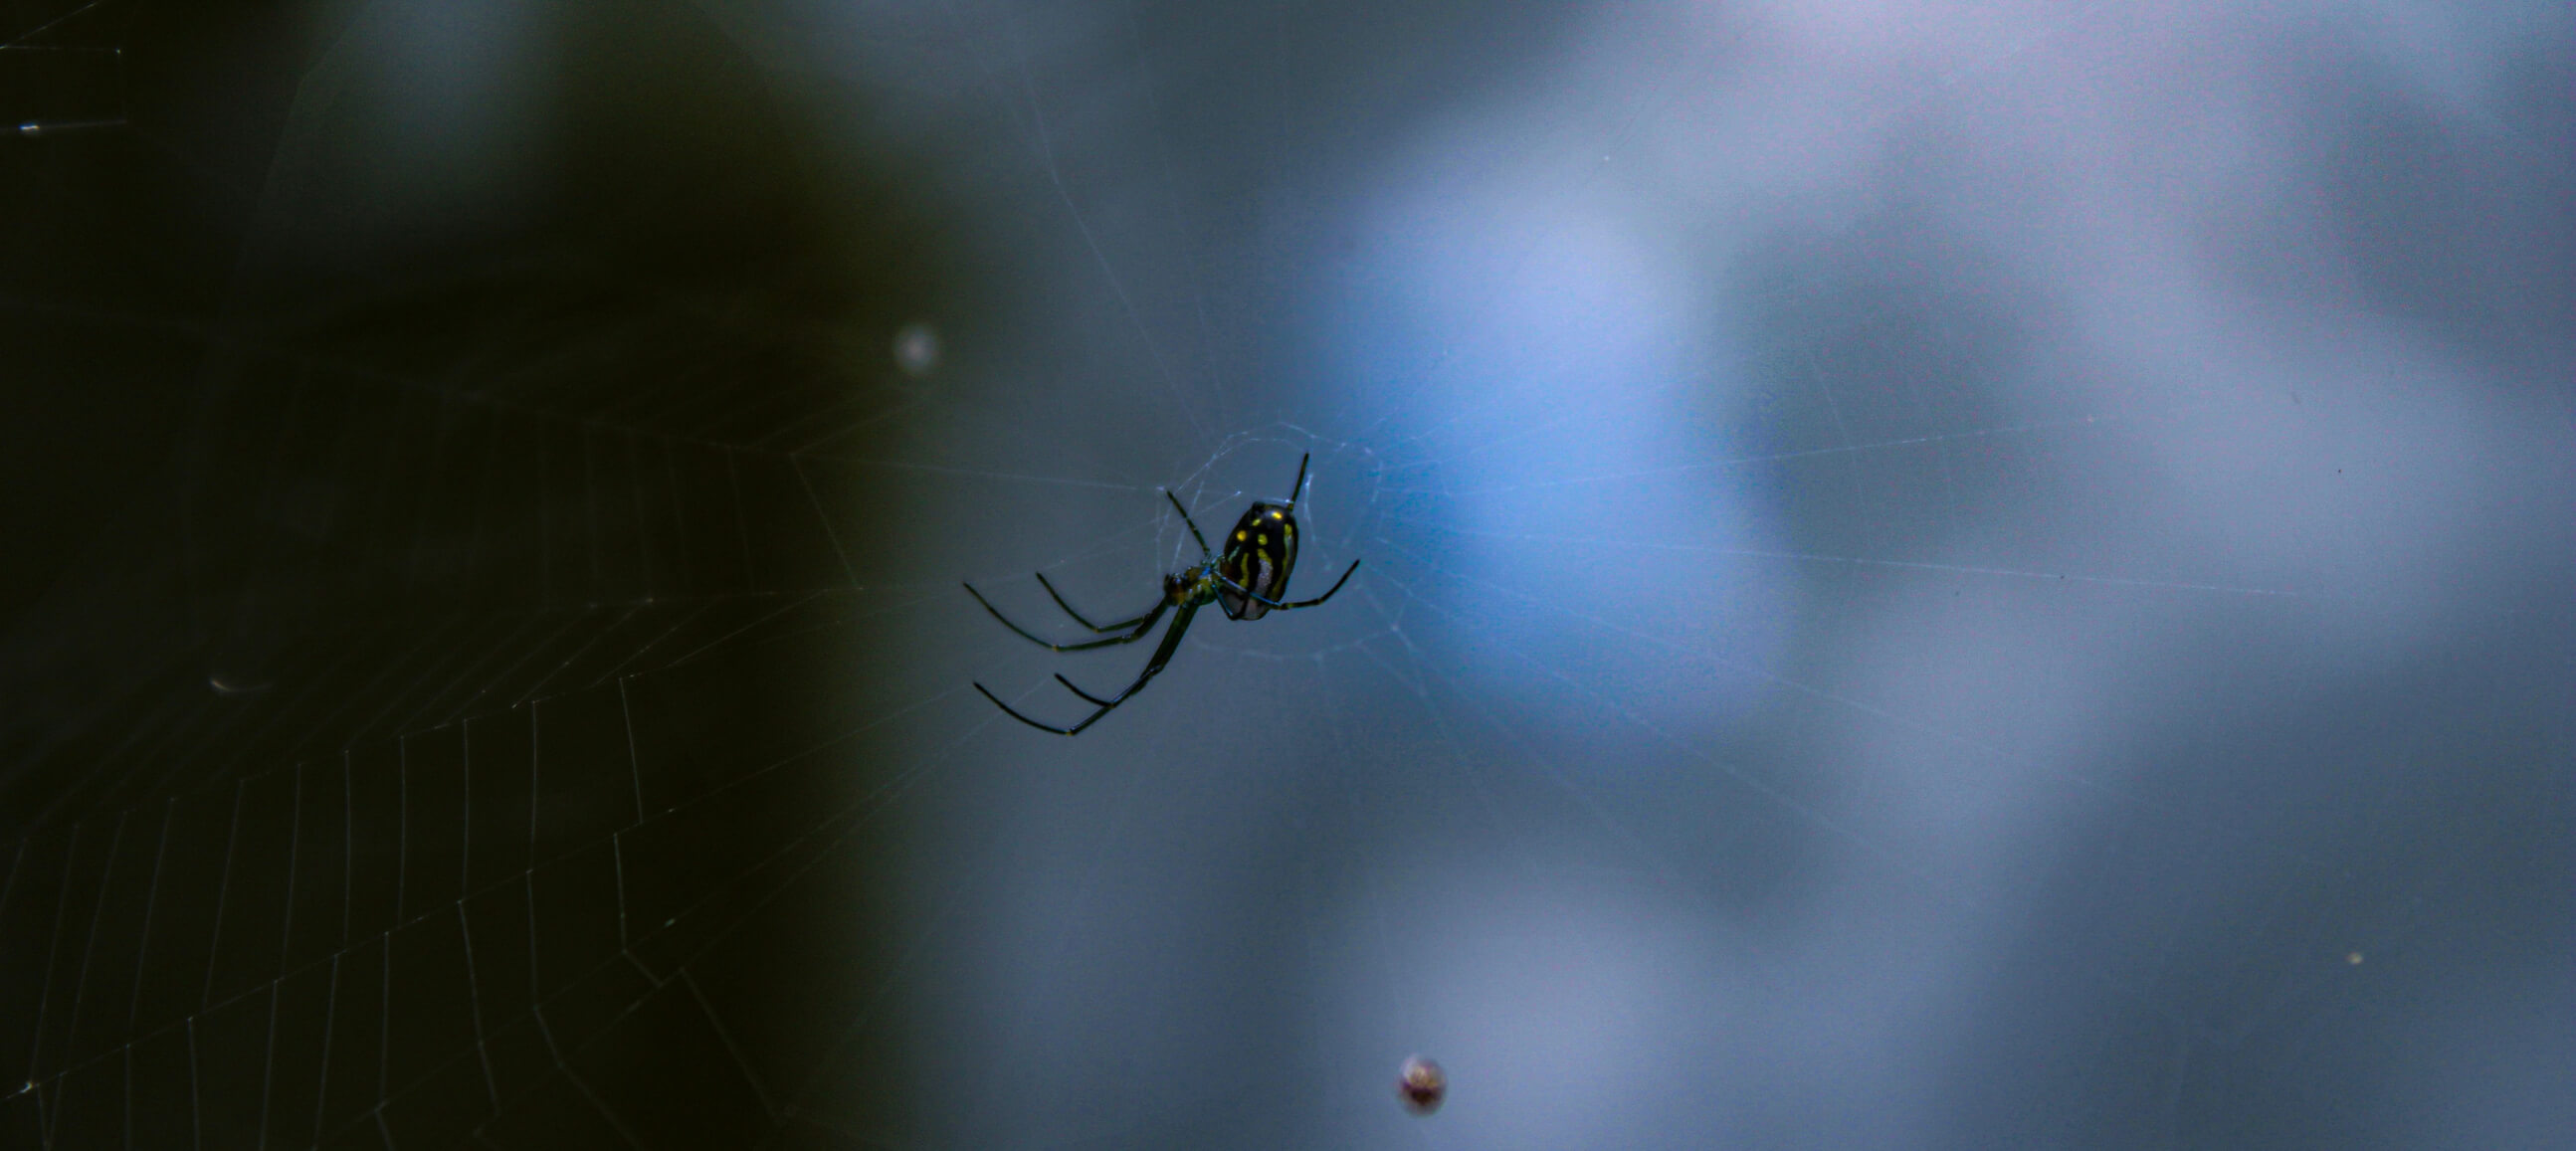 Spider spinning its web against a dark and eery background.